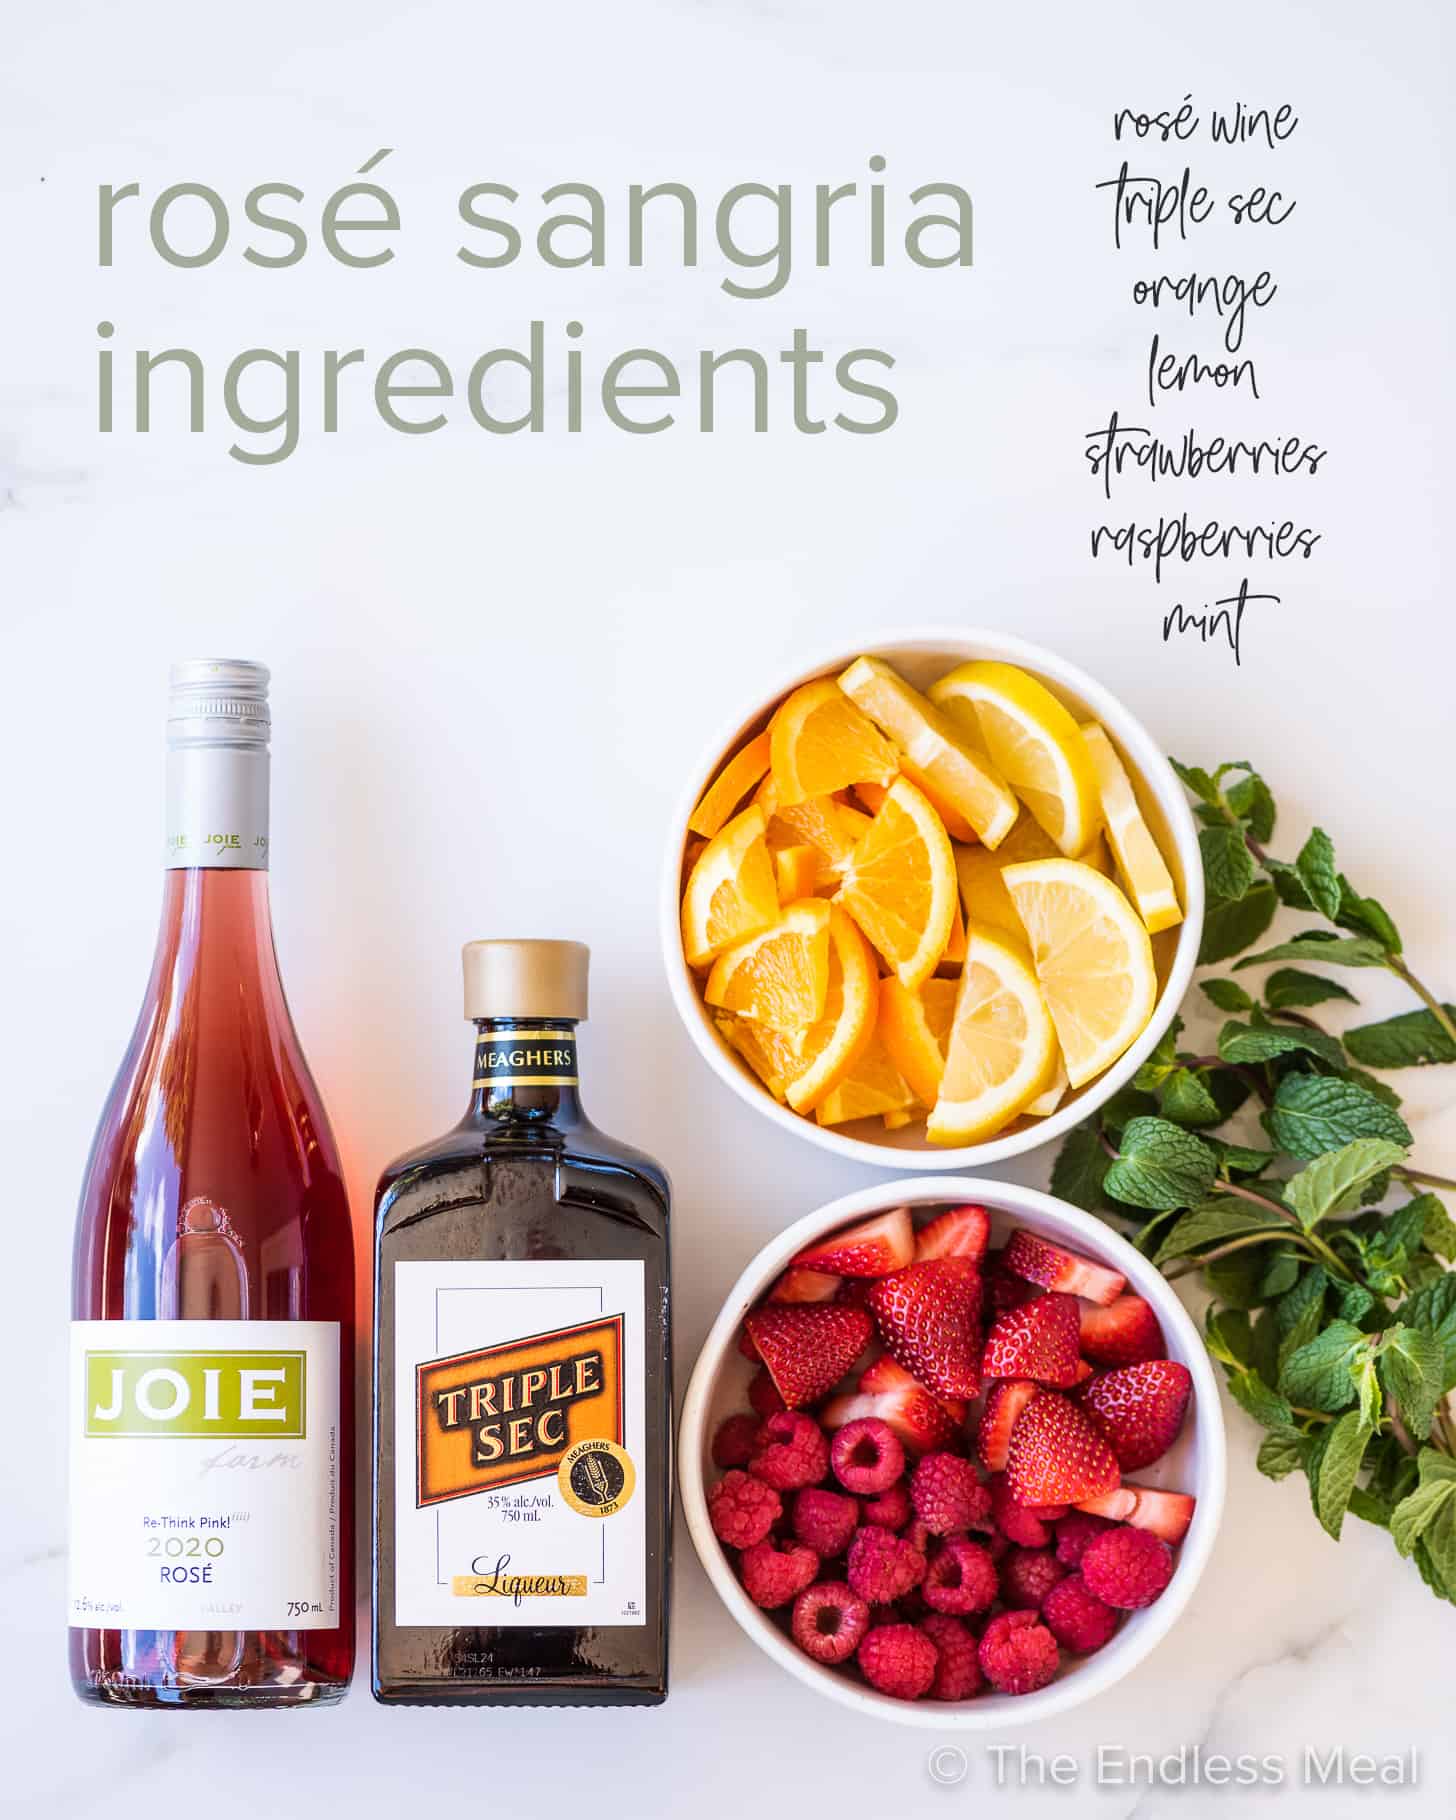 the ingredients to make a rose sangria